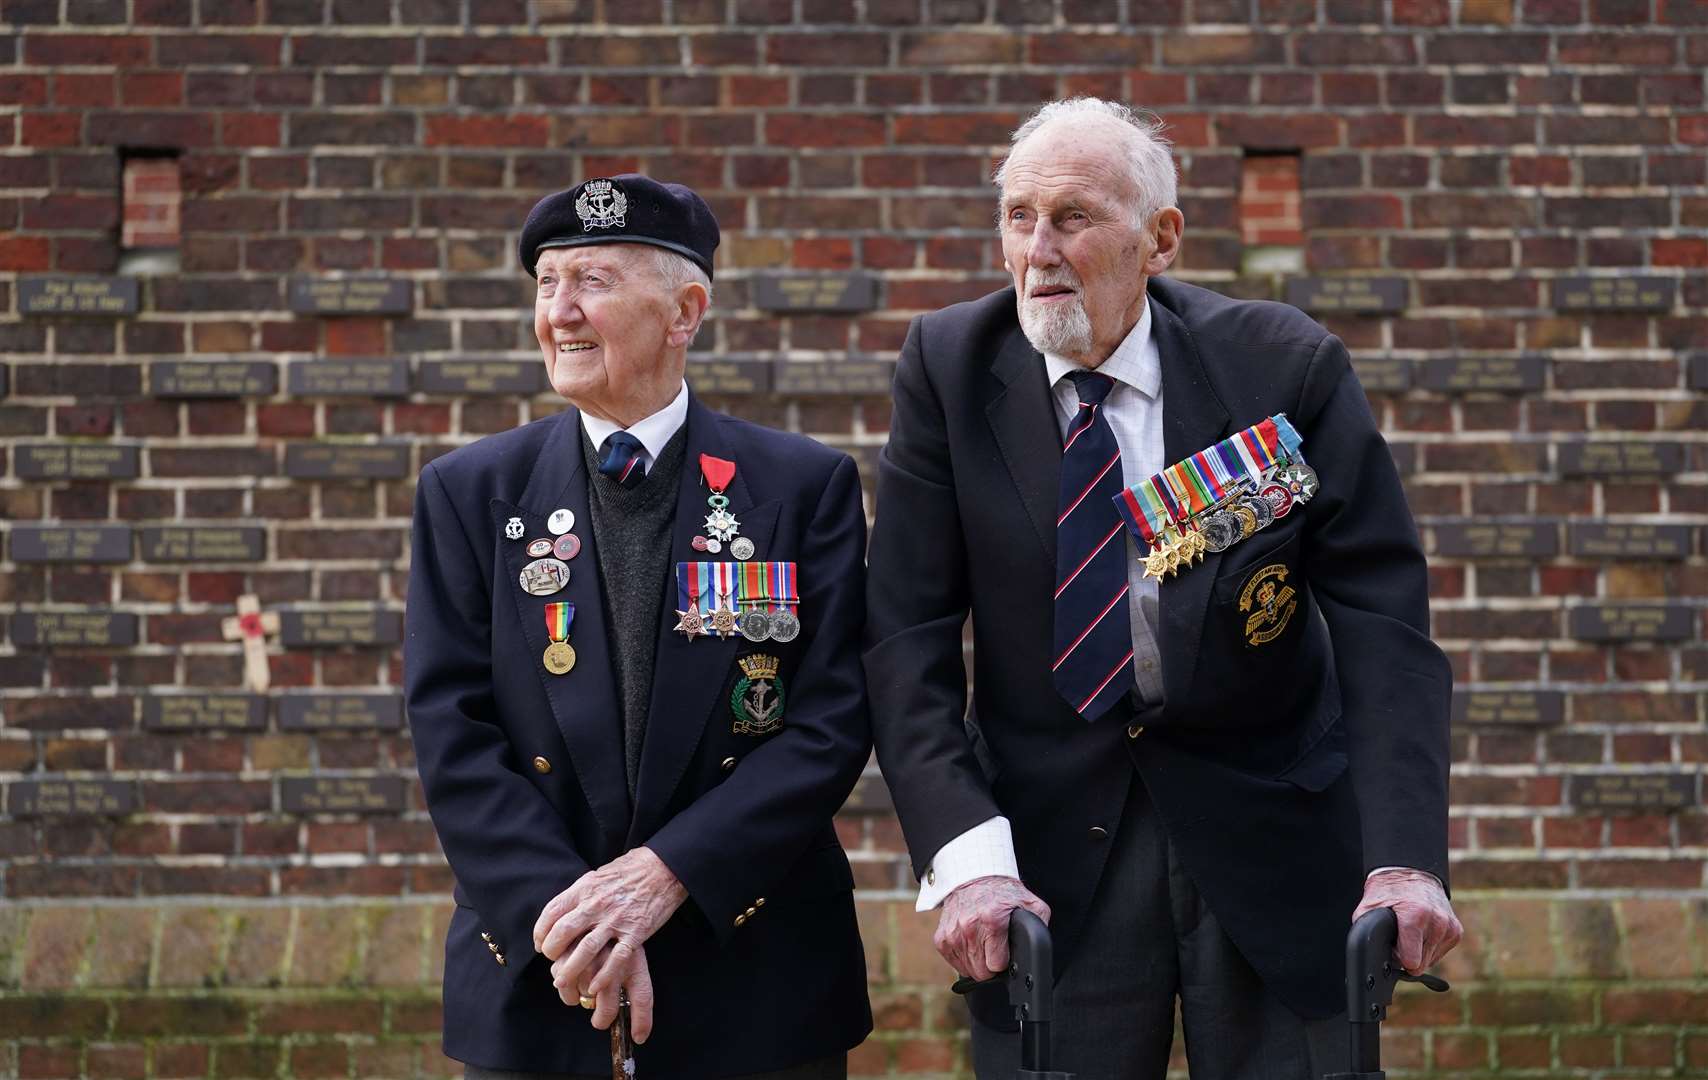 Veterans Stan Ford (left) and John Roberts before receiving their memorial plaques during the launch of the UK’s commemorations for the 80th anniversary of D-Day (Gareth Fuller/PA)